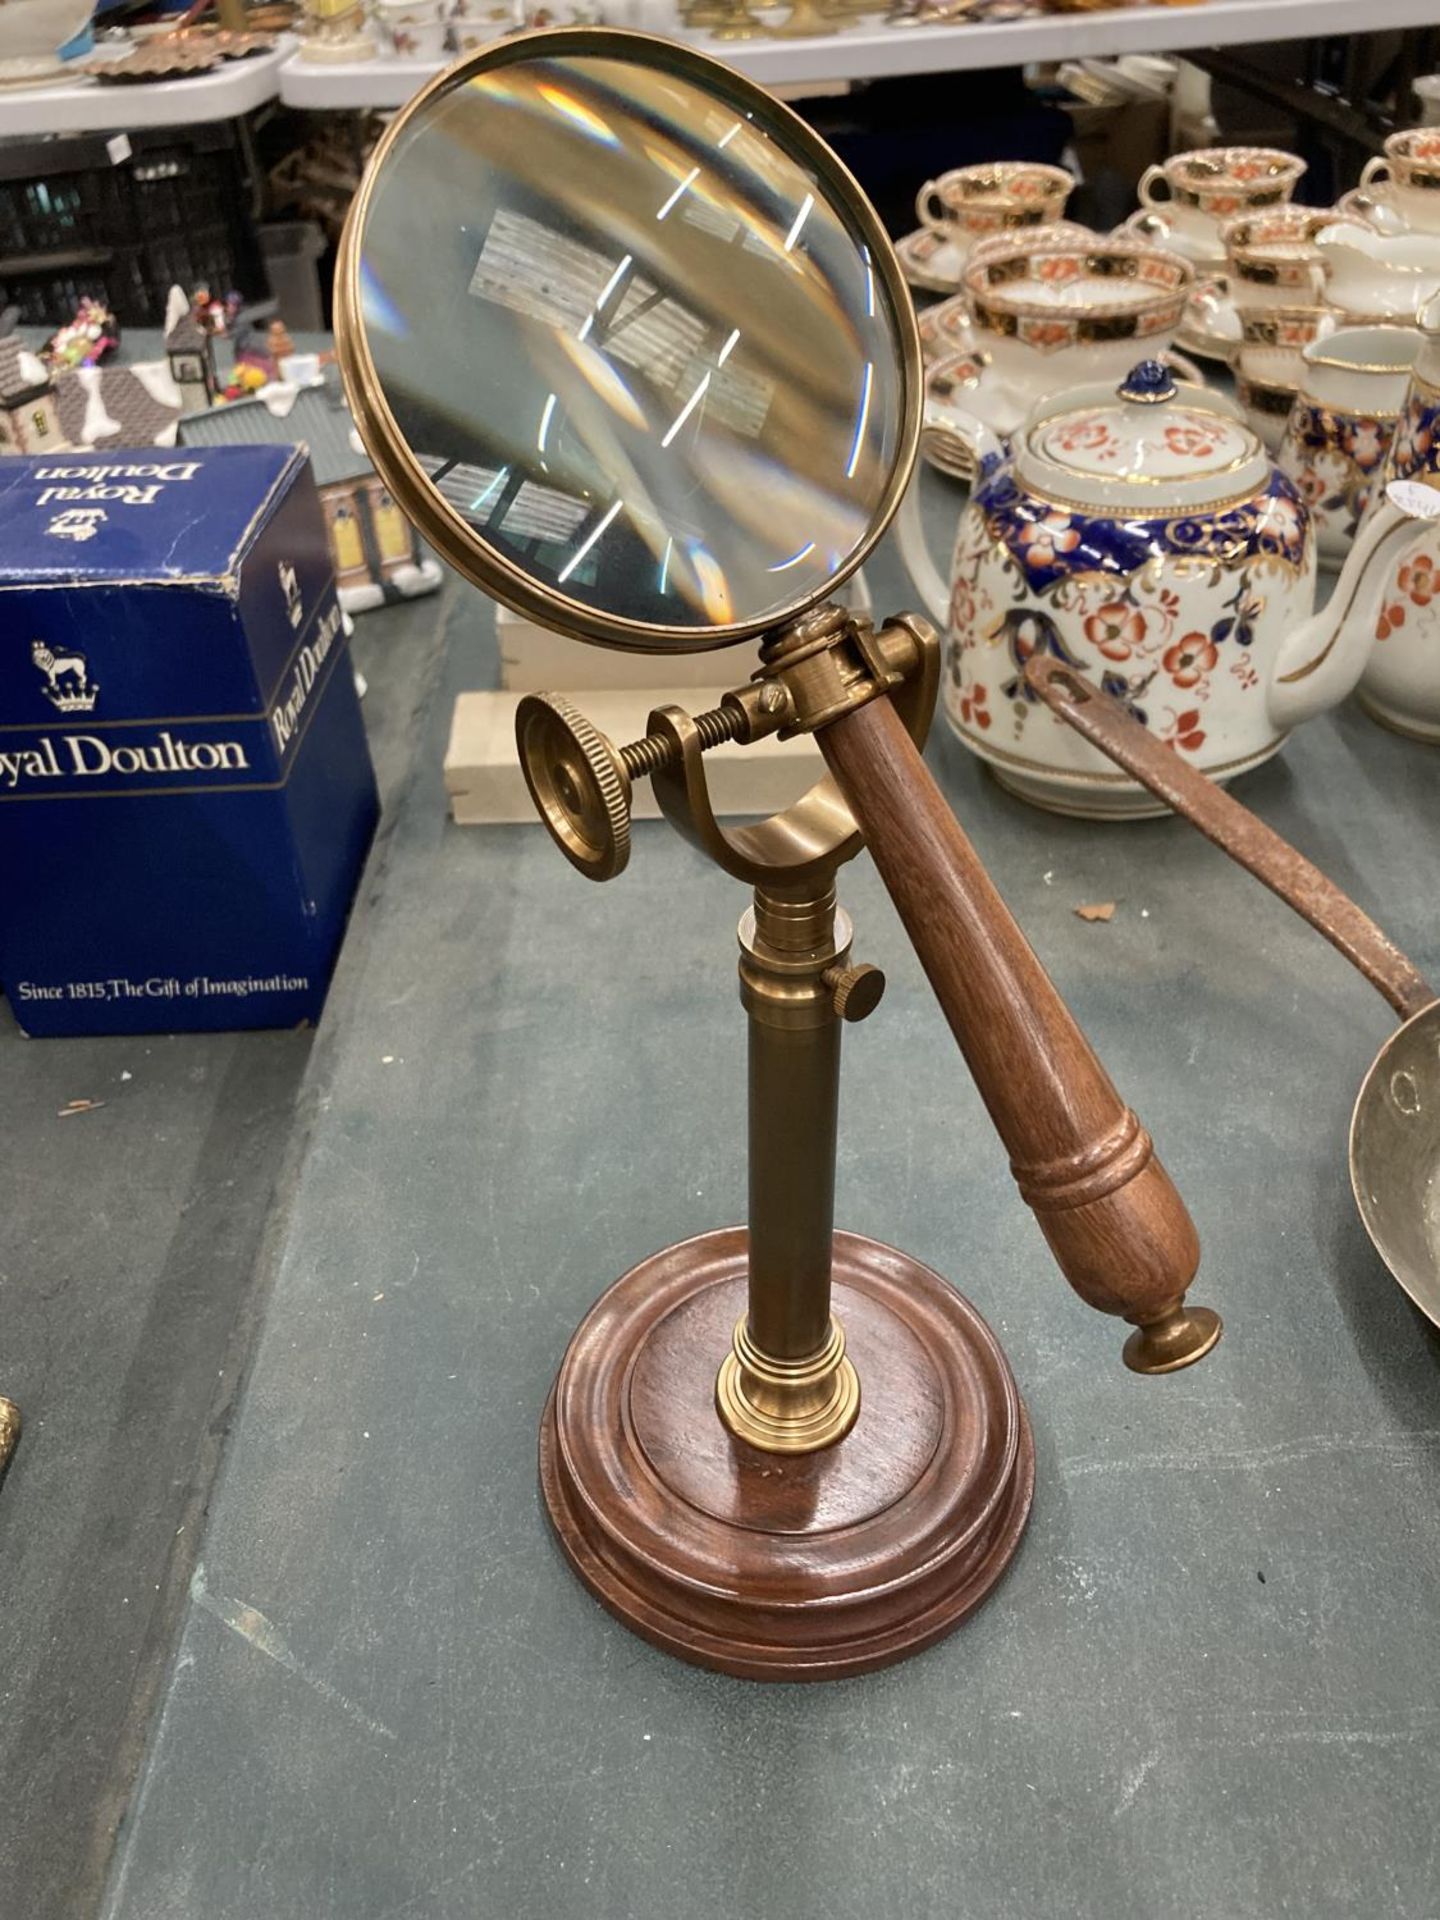 A BRASS MAGNIFYING GLASS ON A GLASS STAND AND WOODEN BASE